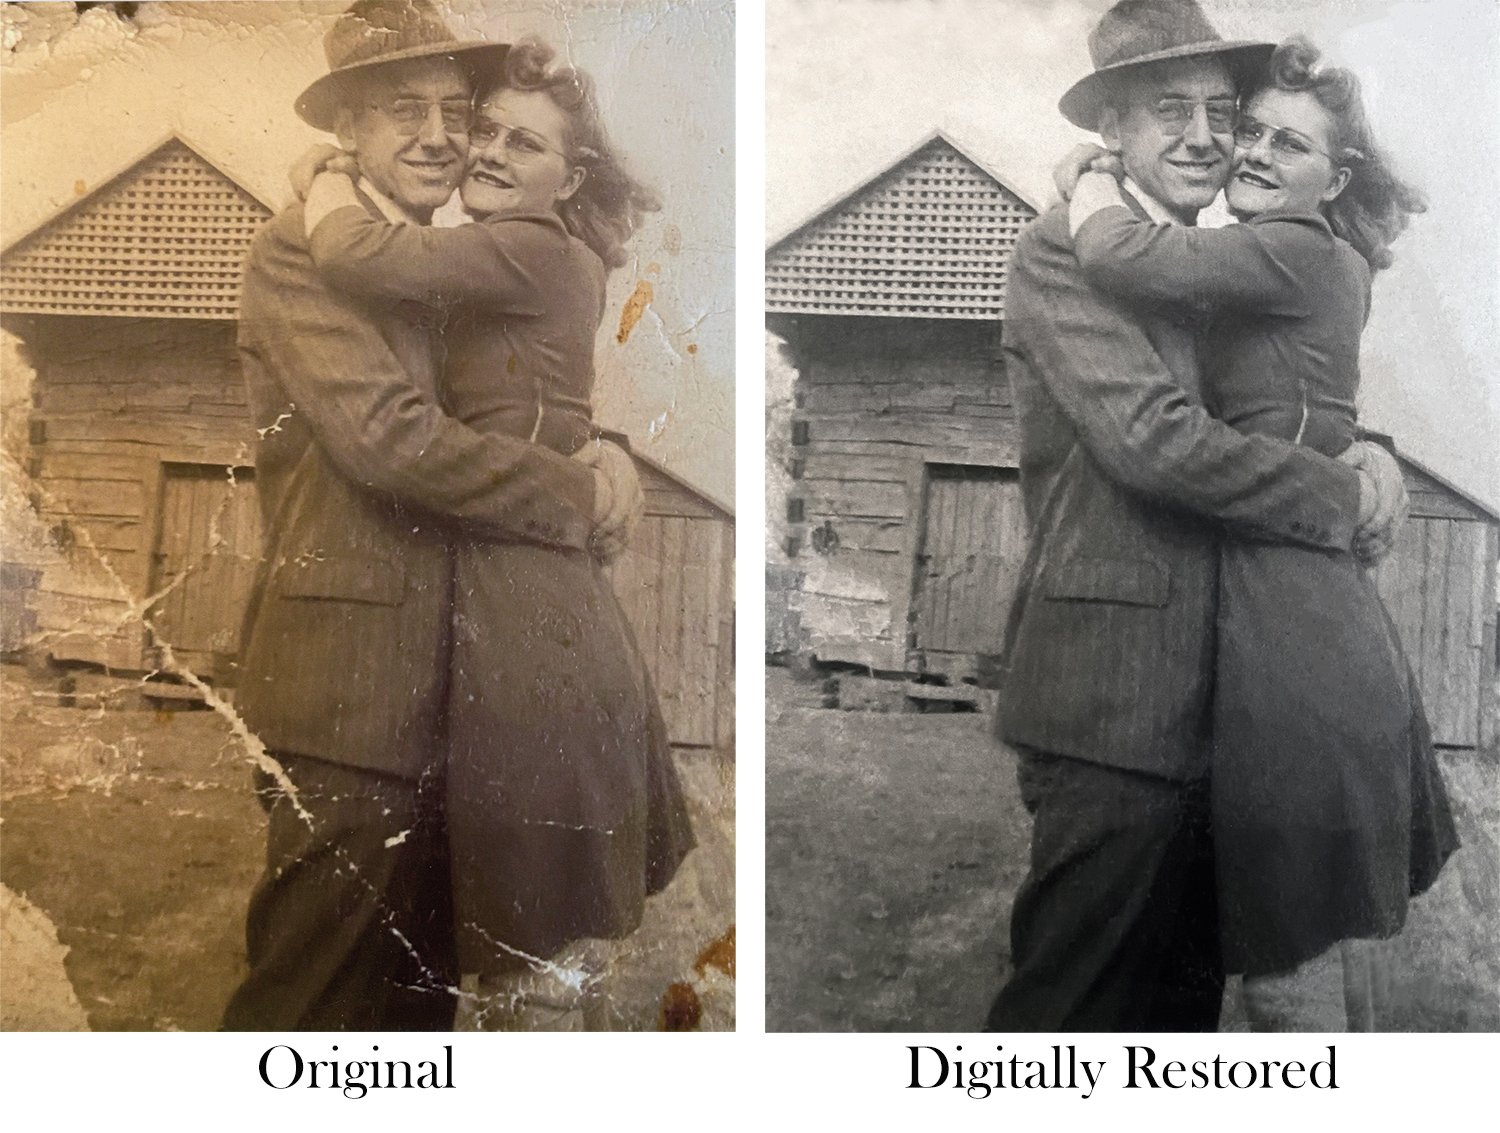  Digital restoration of a torn, stained, and faded photo 